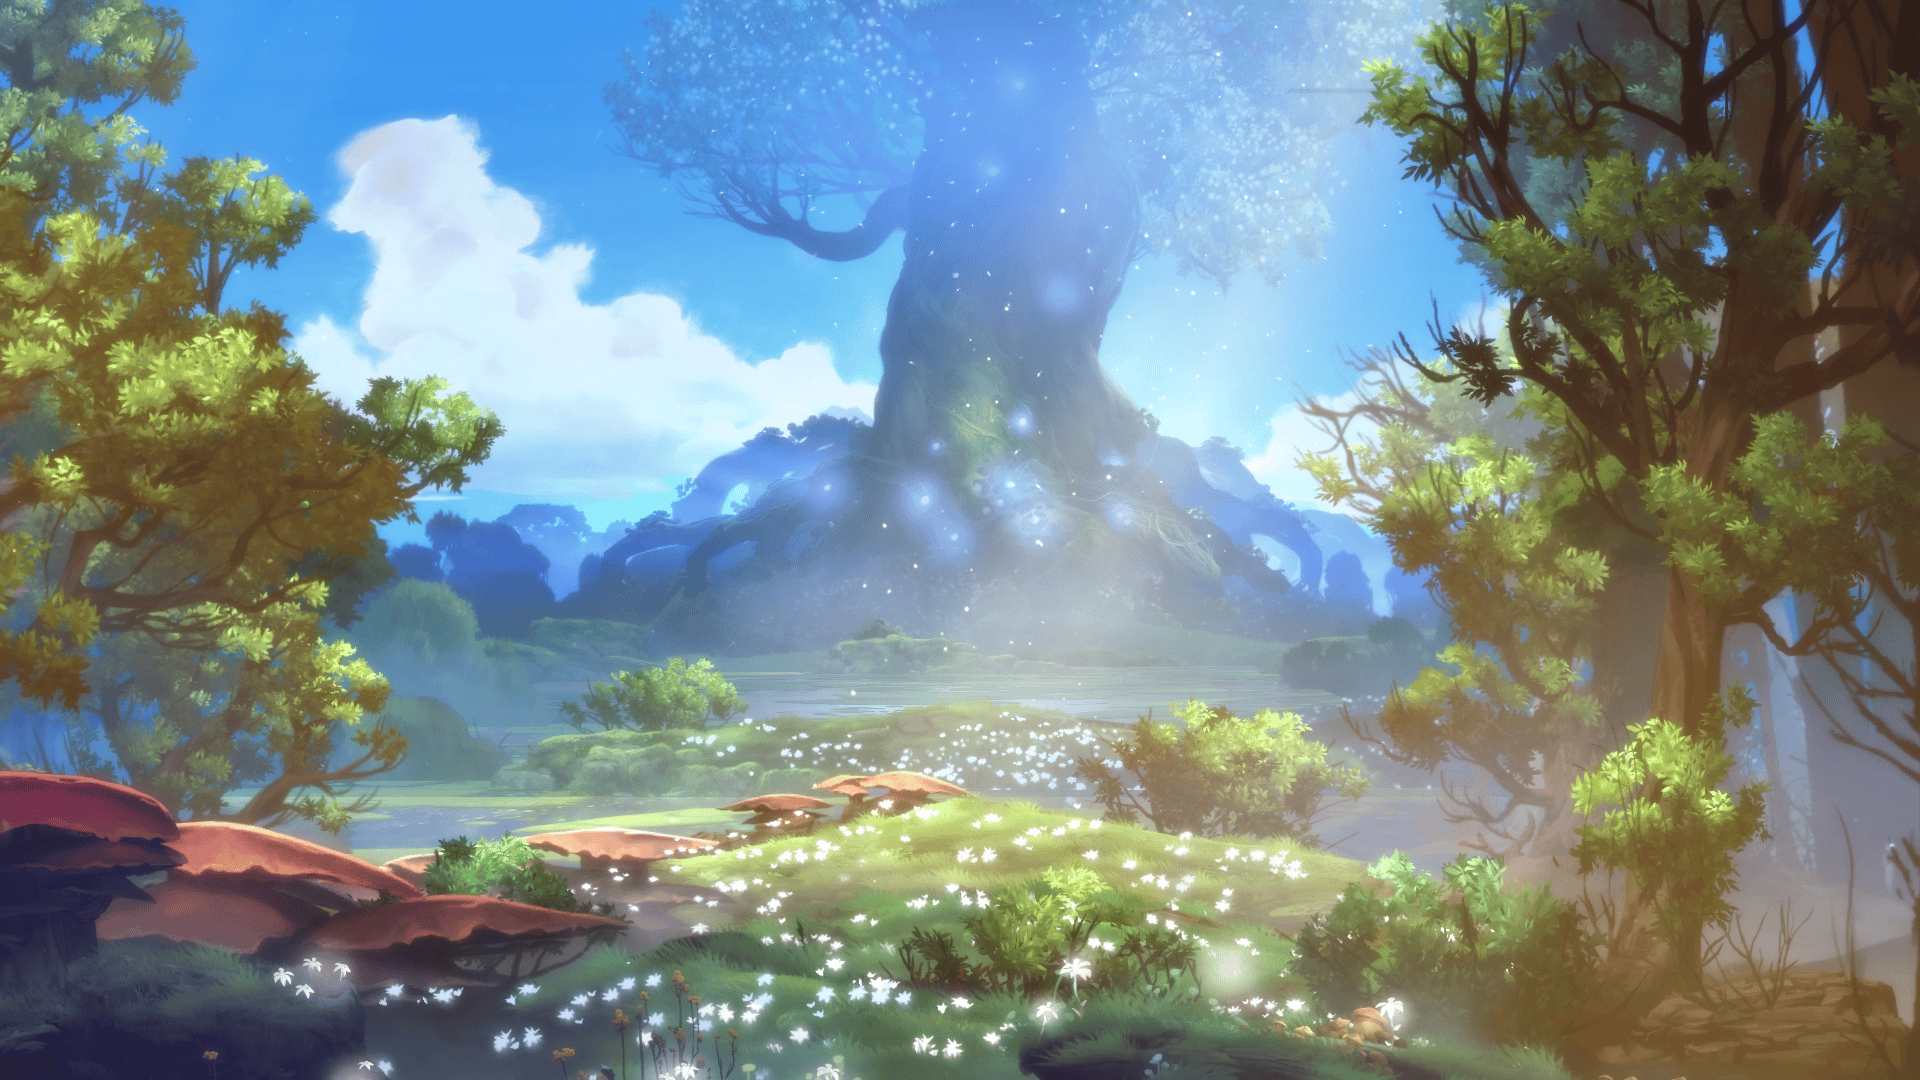 How long is Ori and the Blind Forest demo?